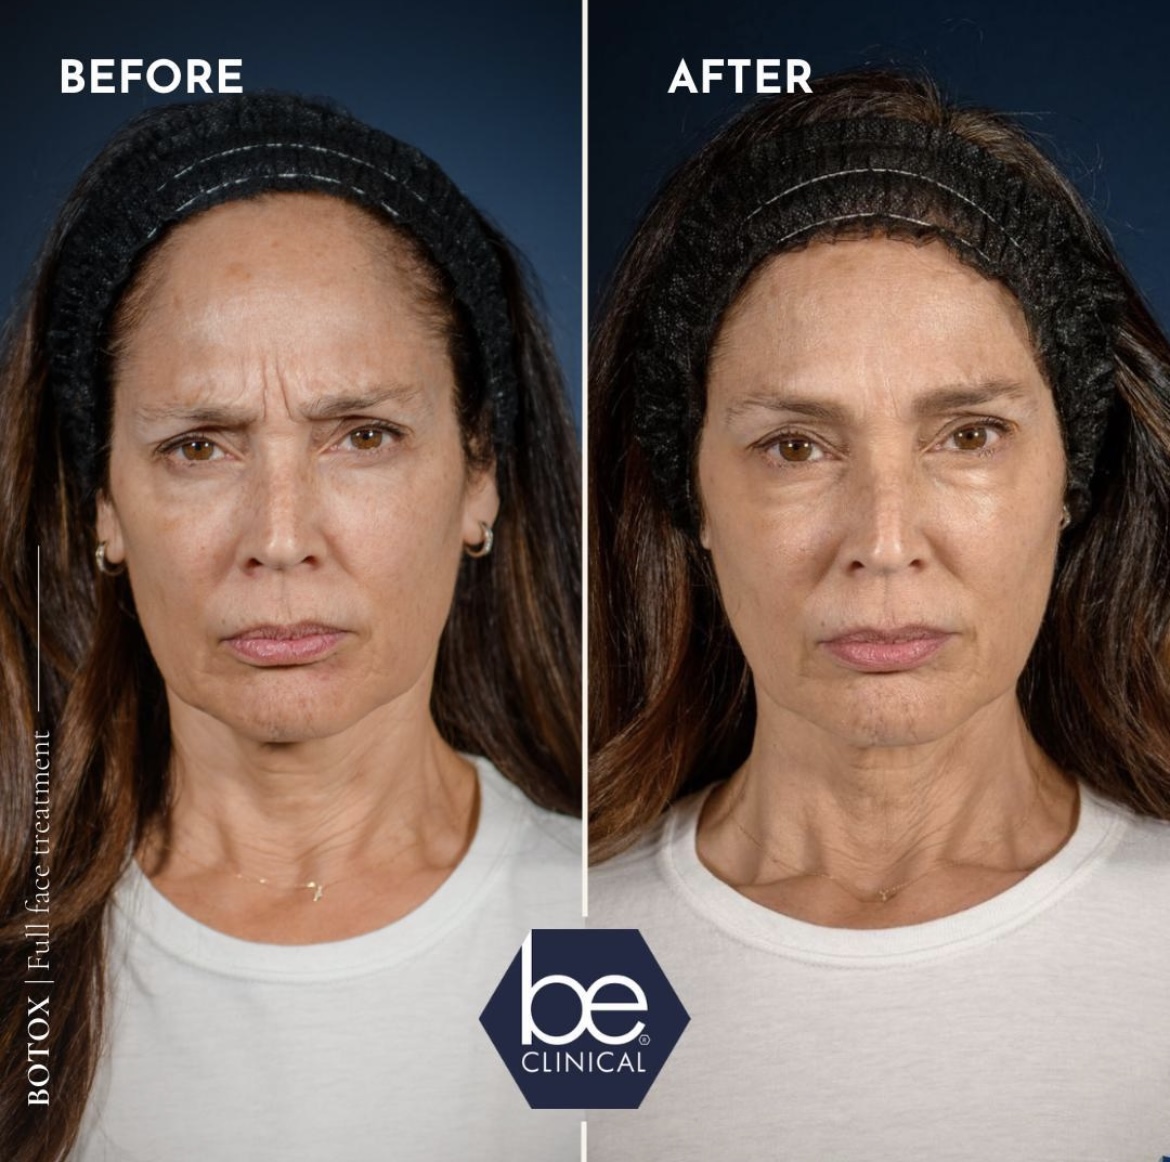 dysport-full-face-before-after-be-clinical